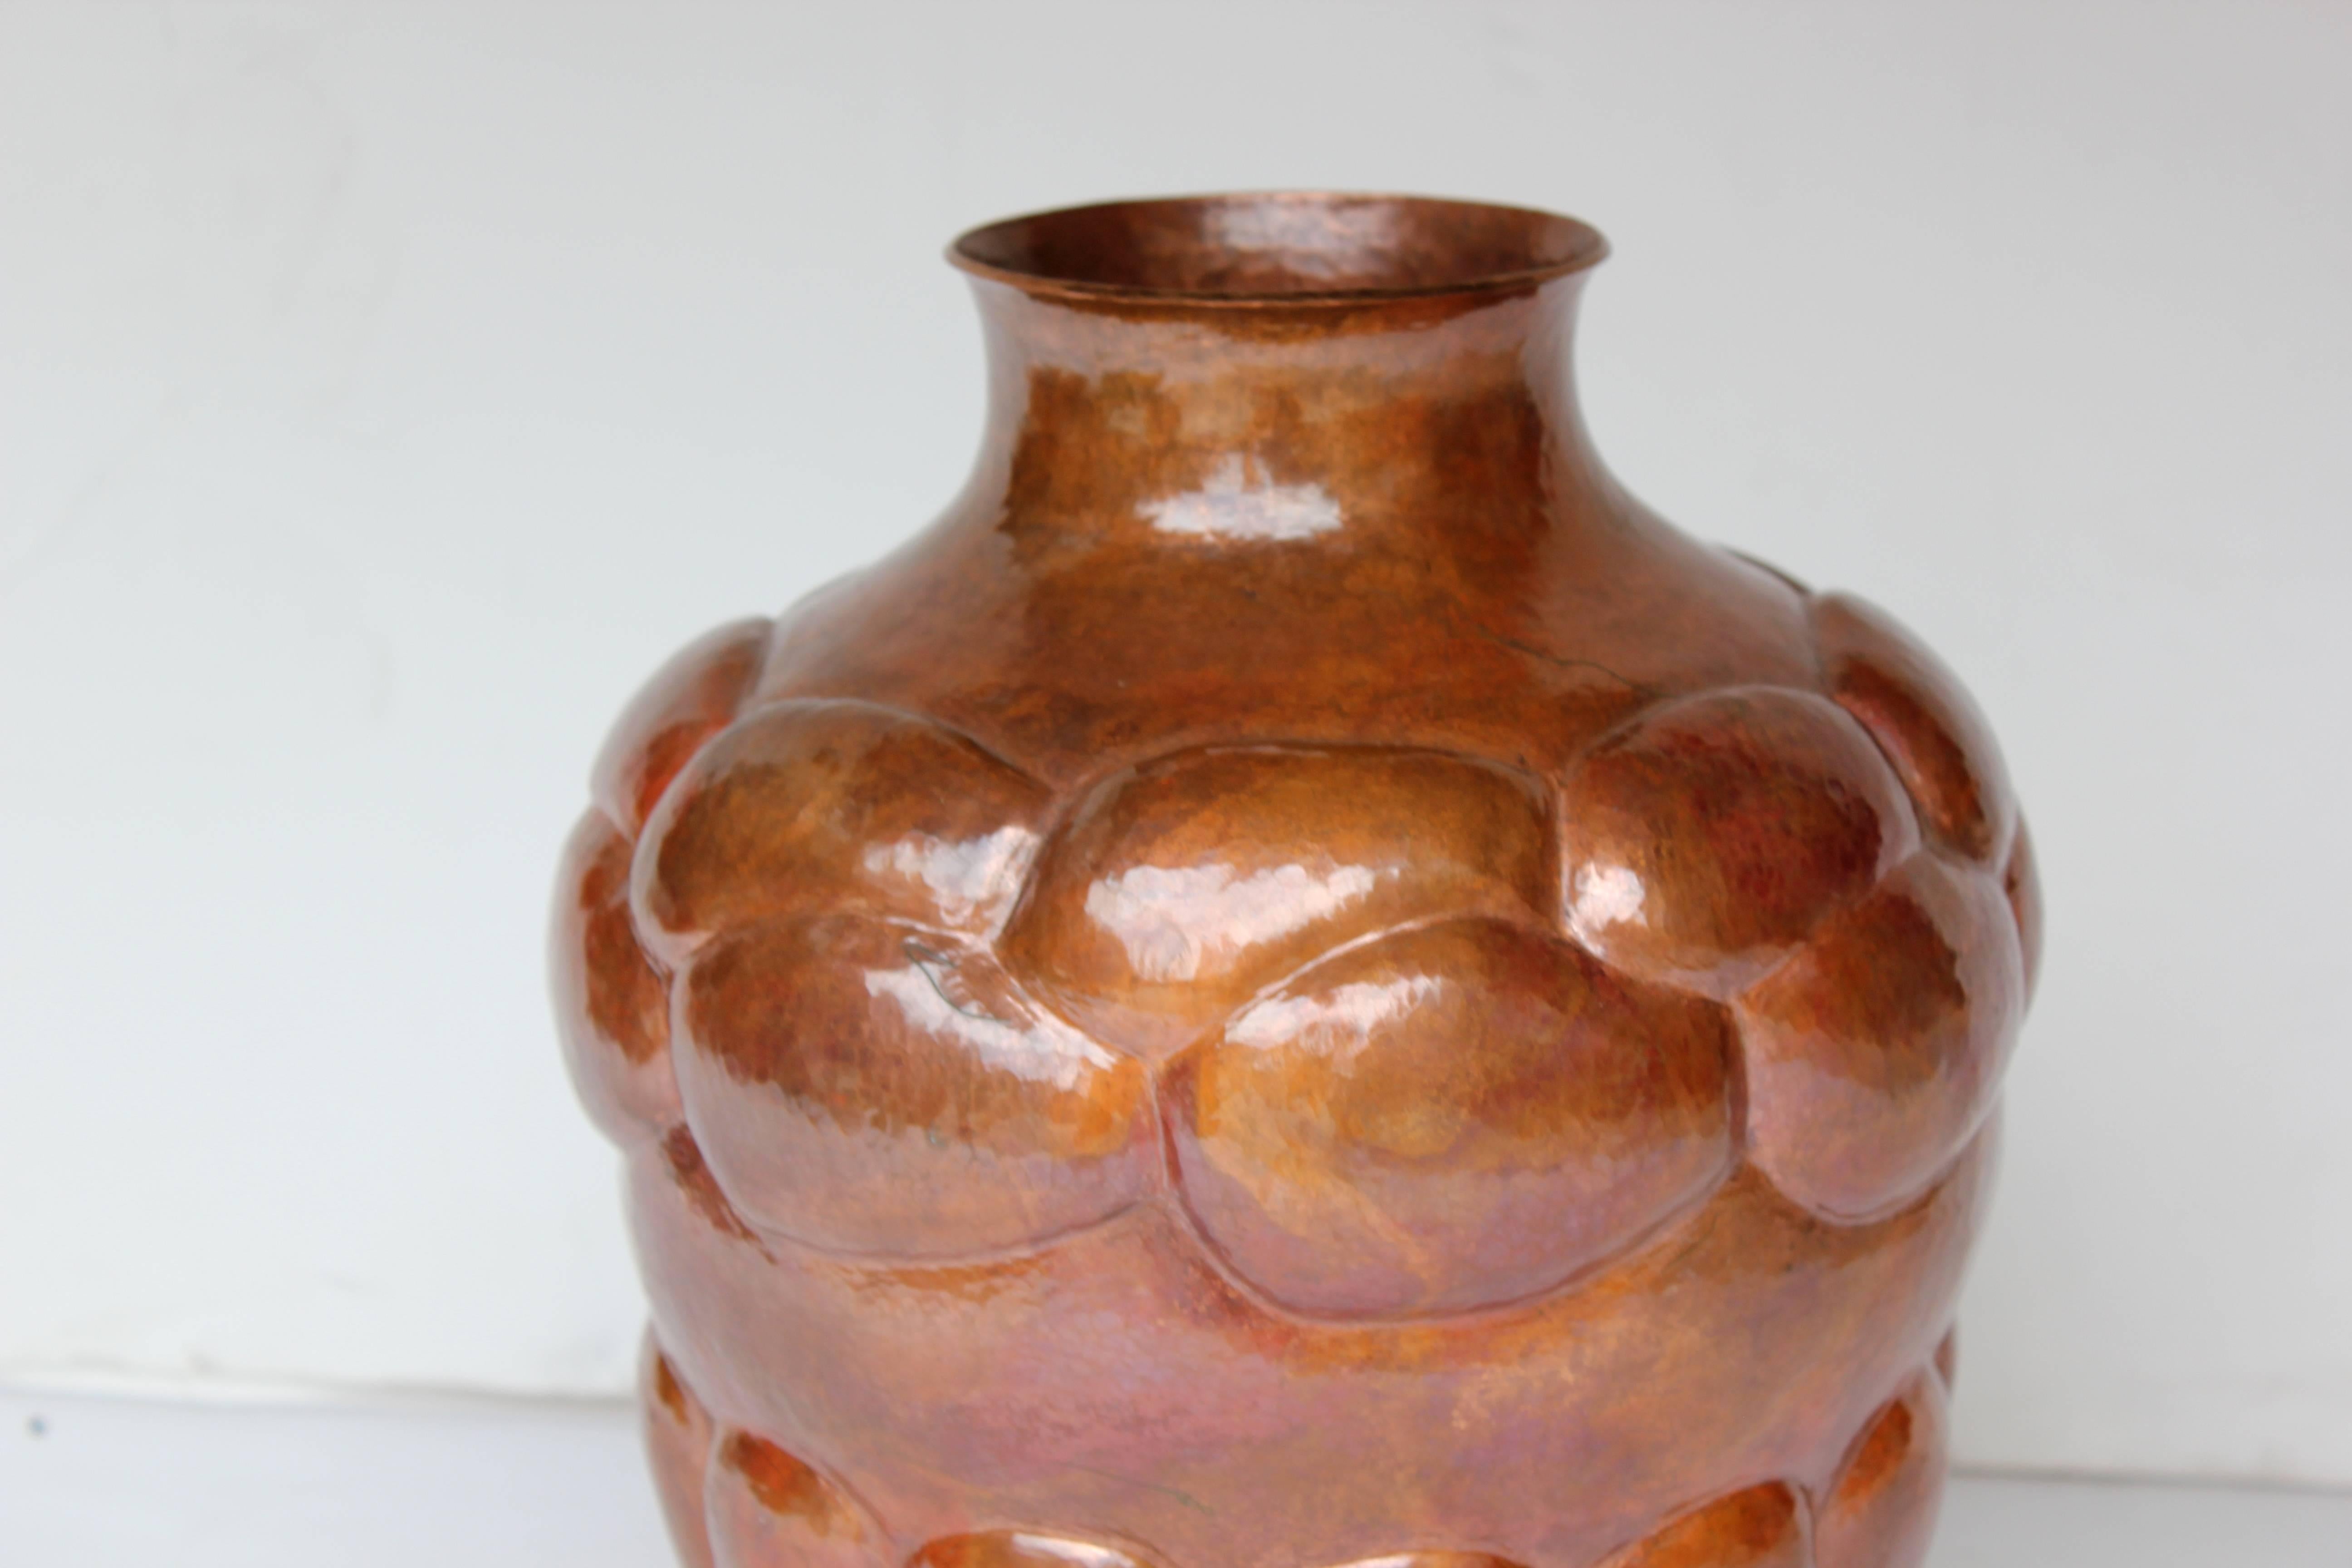 Hand-wrought copper vase from Michoacán, Mexico.